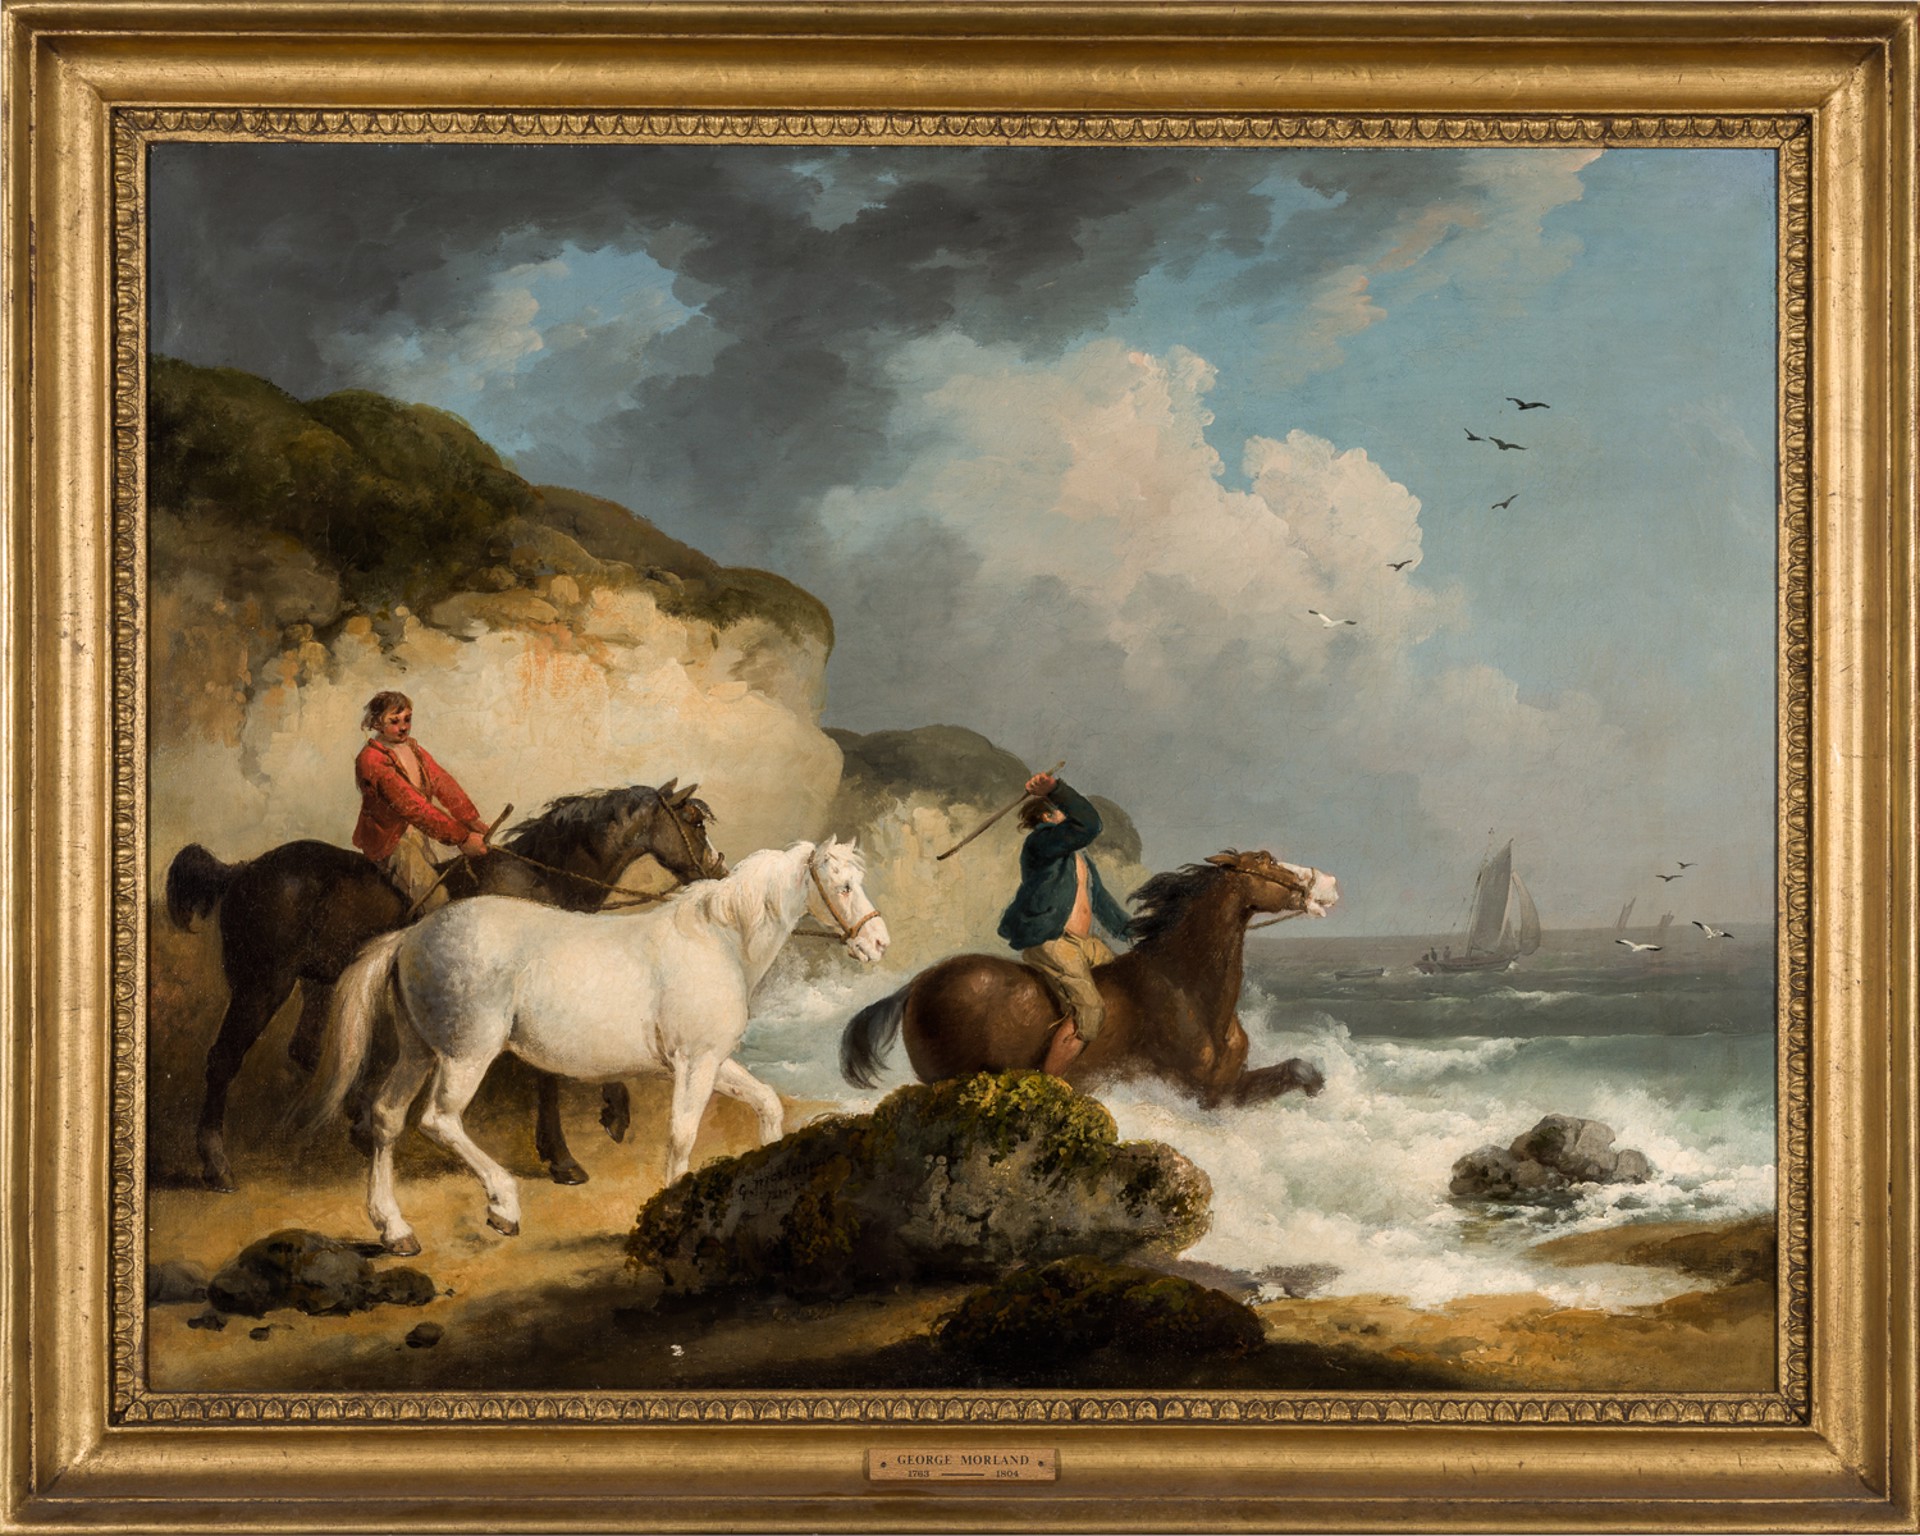 HORSES BY THE SEA by George Morland